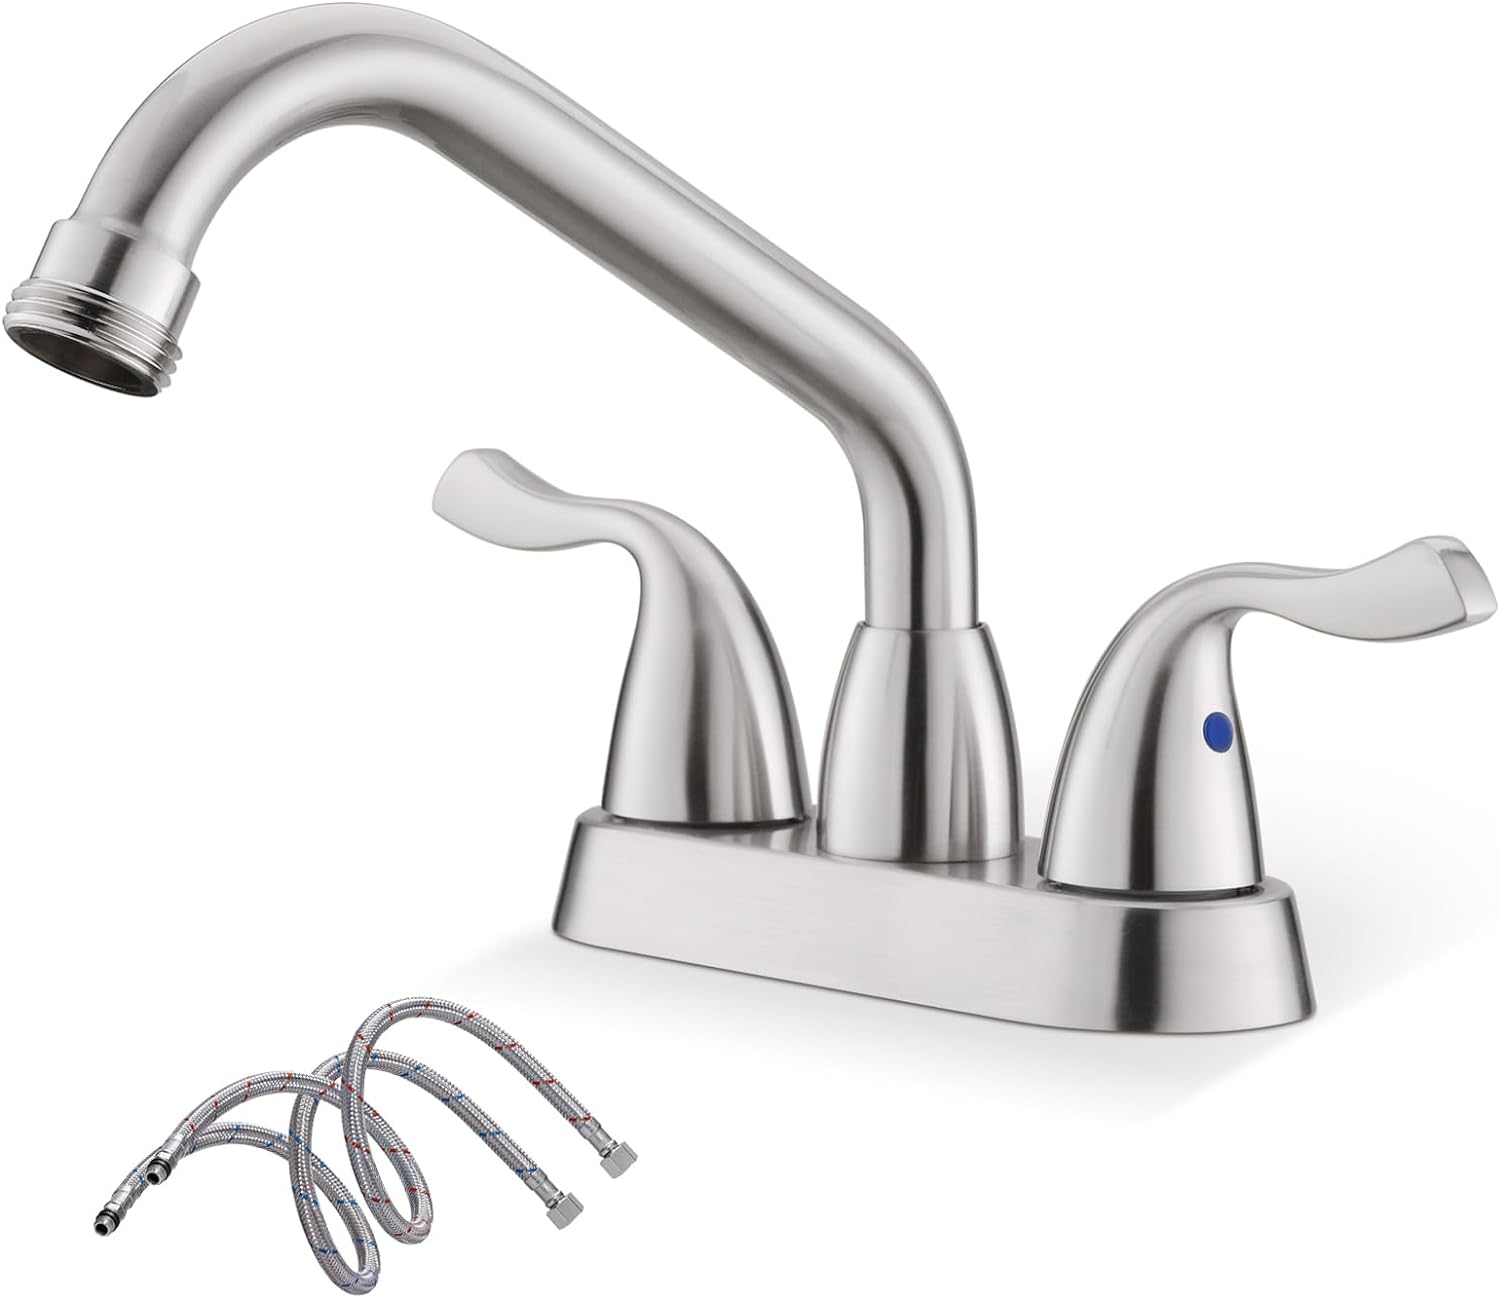 Phiestina Brushed Nickel Utility Sink/Laundry Faucet, 4 Inch Centerest 2 or 3 Hole Rotatable Swivel 360 Spout with Threaded End, with Water Supply Line, BF25-7-BN